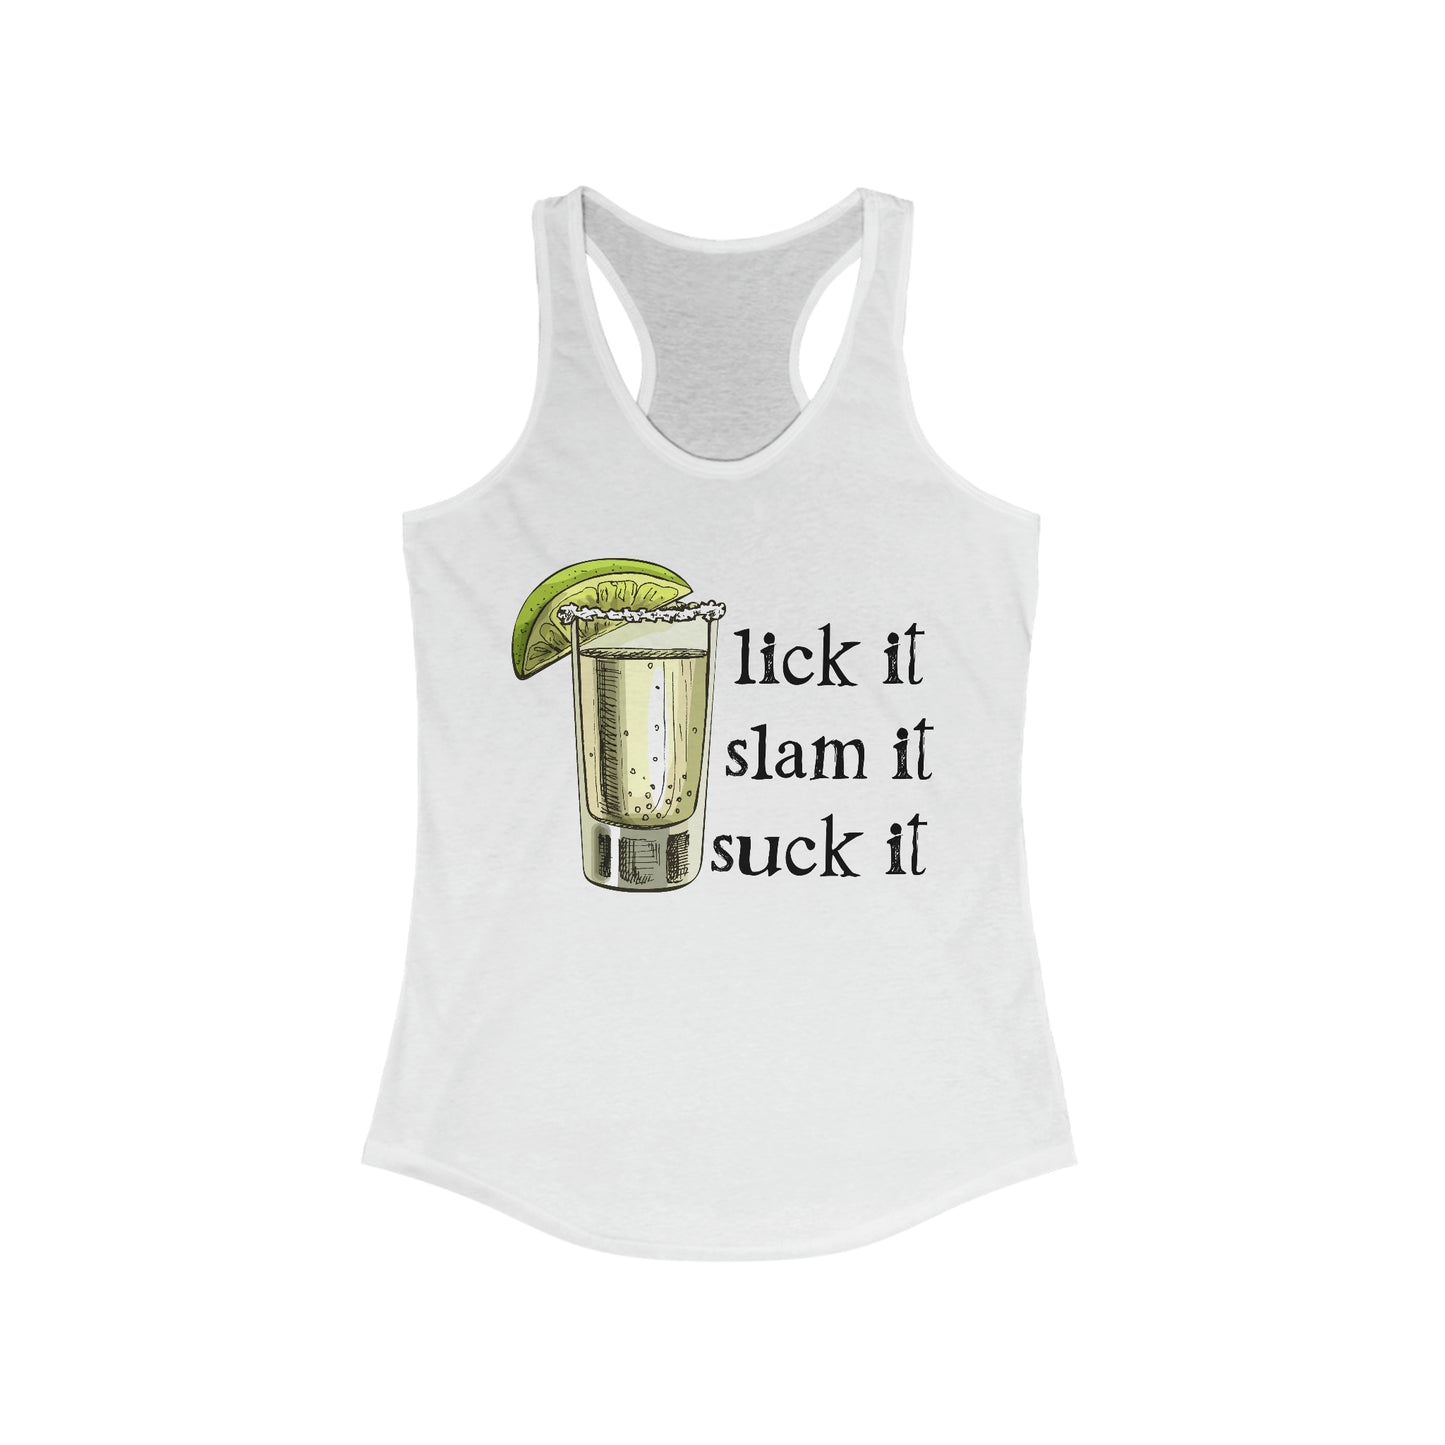 Tequila Shot Tank Top For Cinco De Mayo Shirt For Party Shirt For Funny Tequila Top For Salty Shirt For Party Gift Alcohol Summer Tank